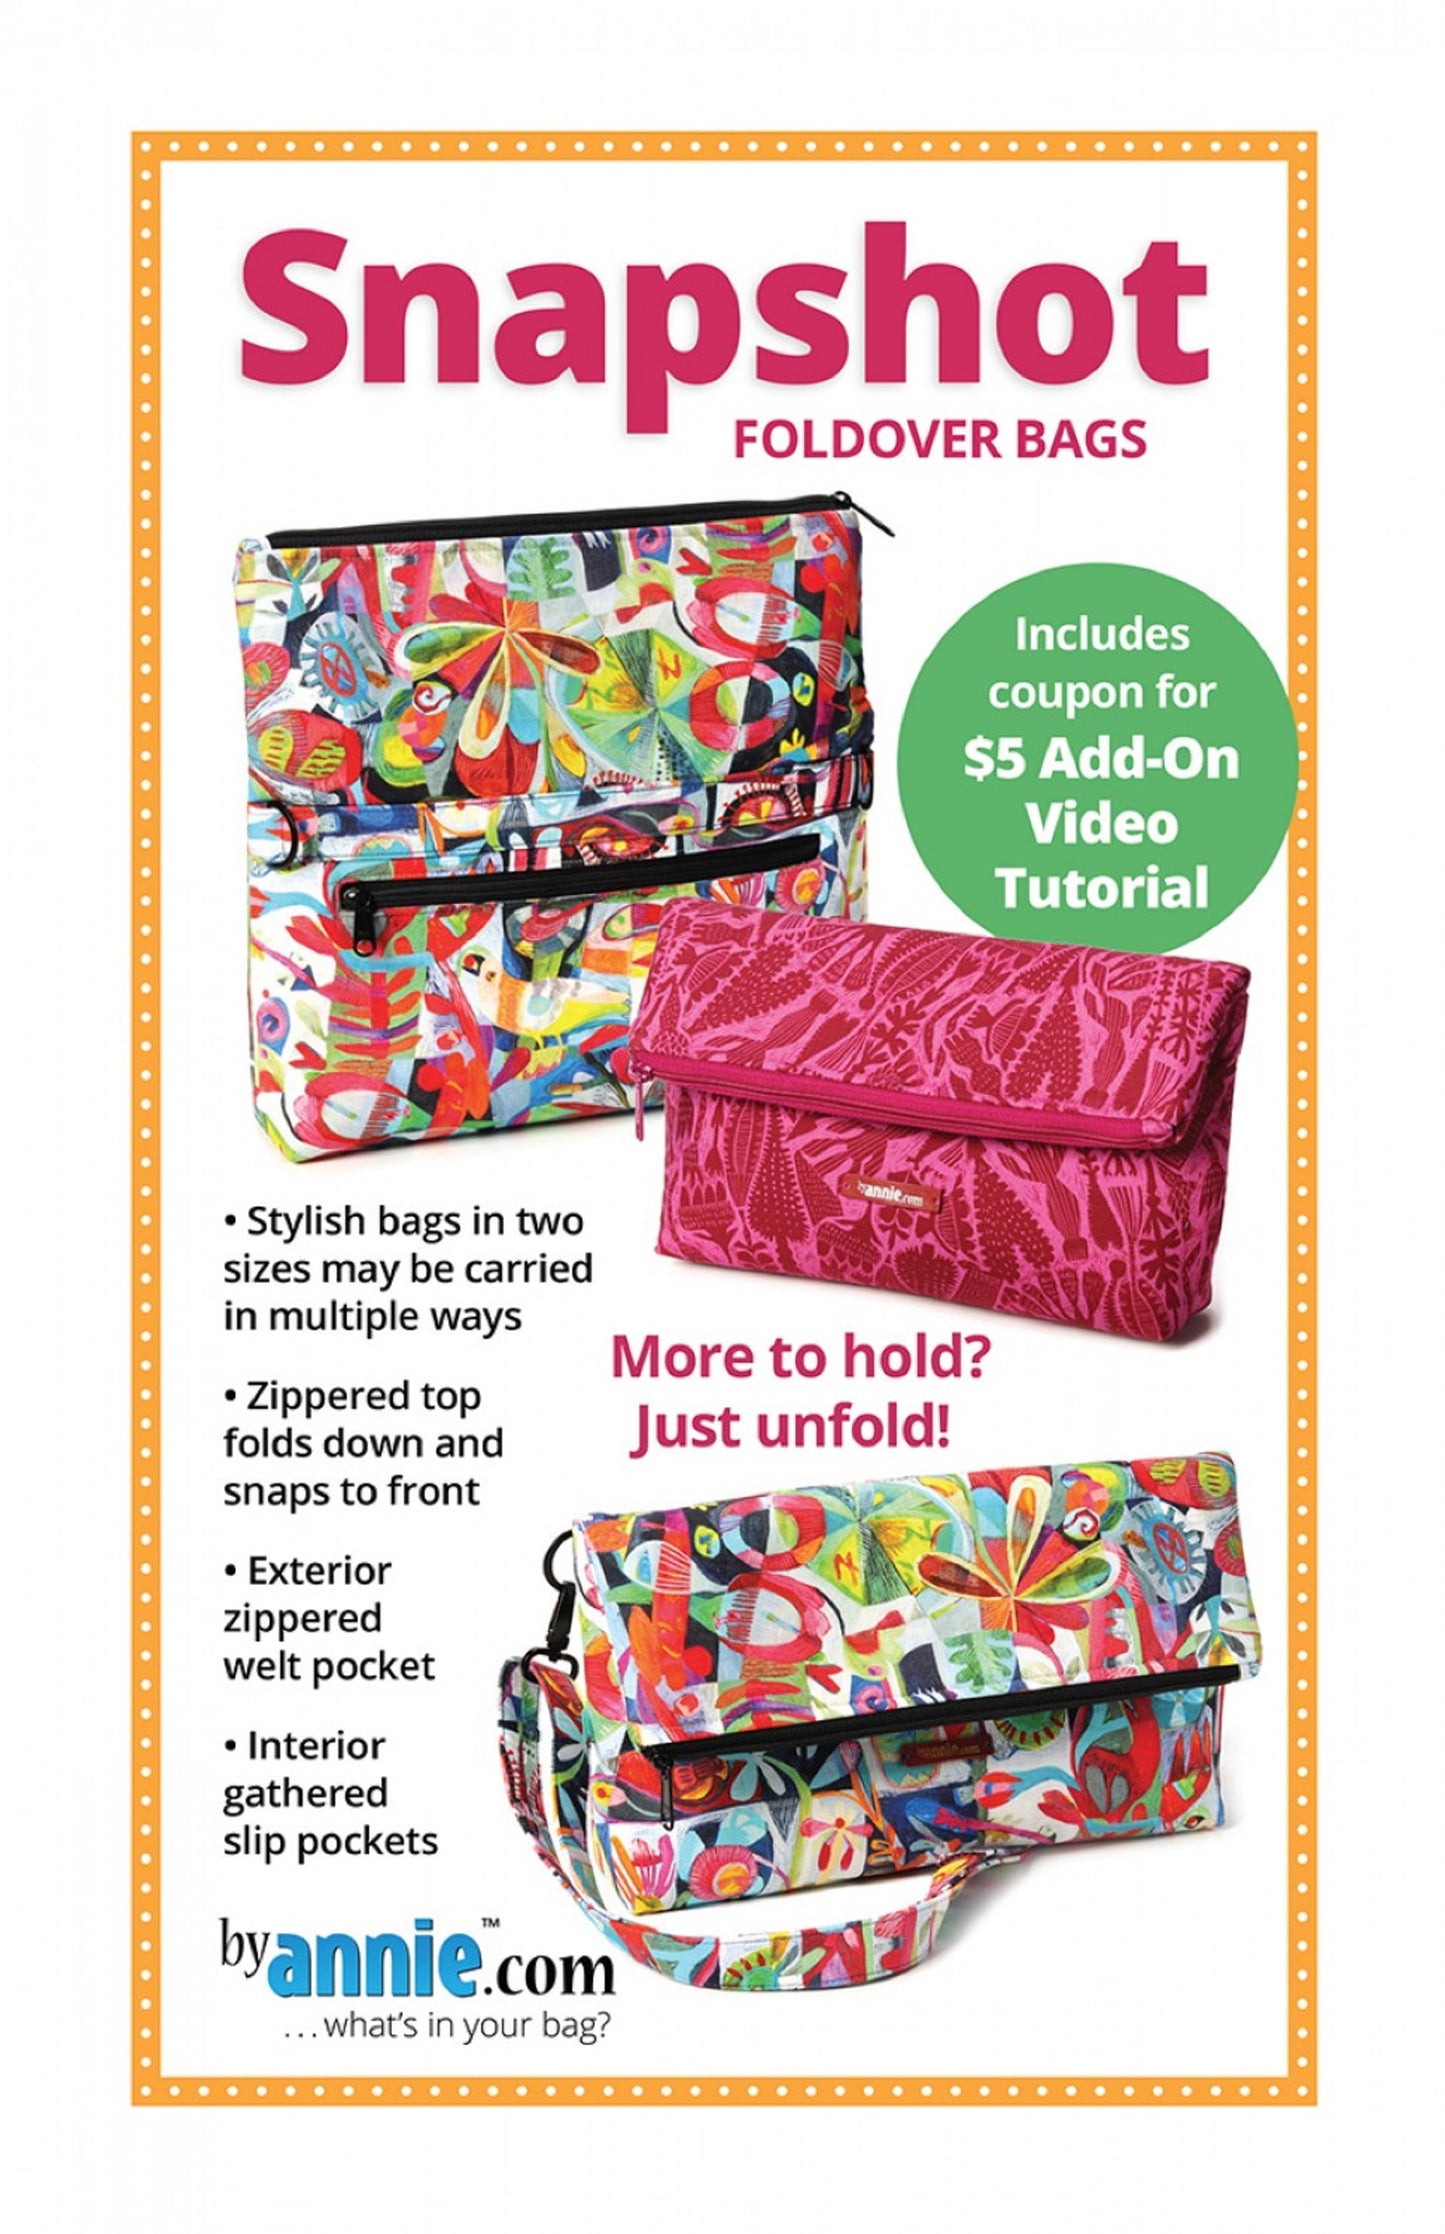 Snapshot Foldover Bags by Annie.com-Small and Large